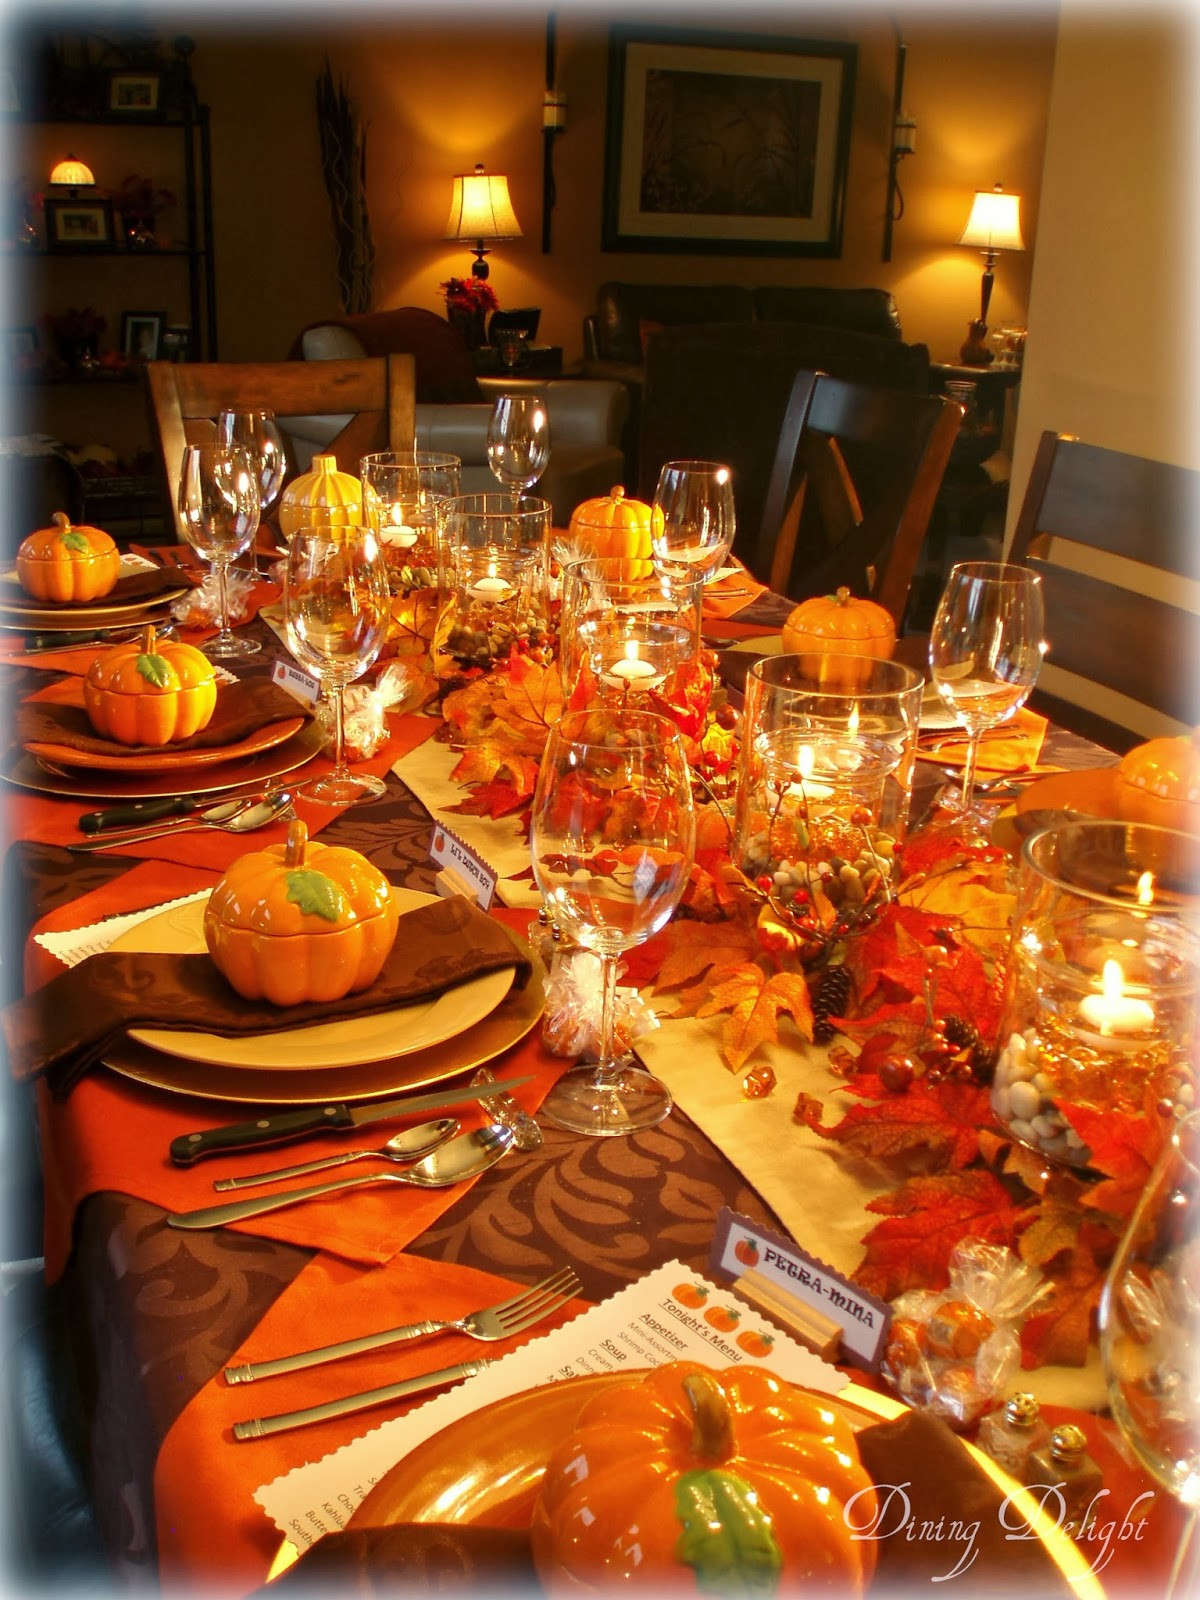 Large Dinner Party Ideas
 Dining Delight Fall Dinner Party for Ten